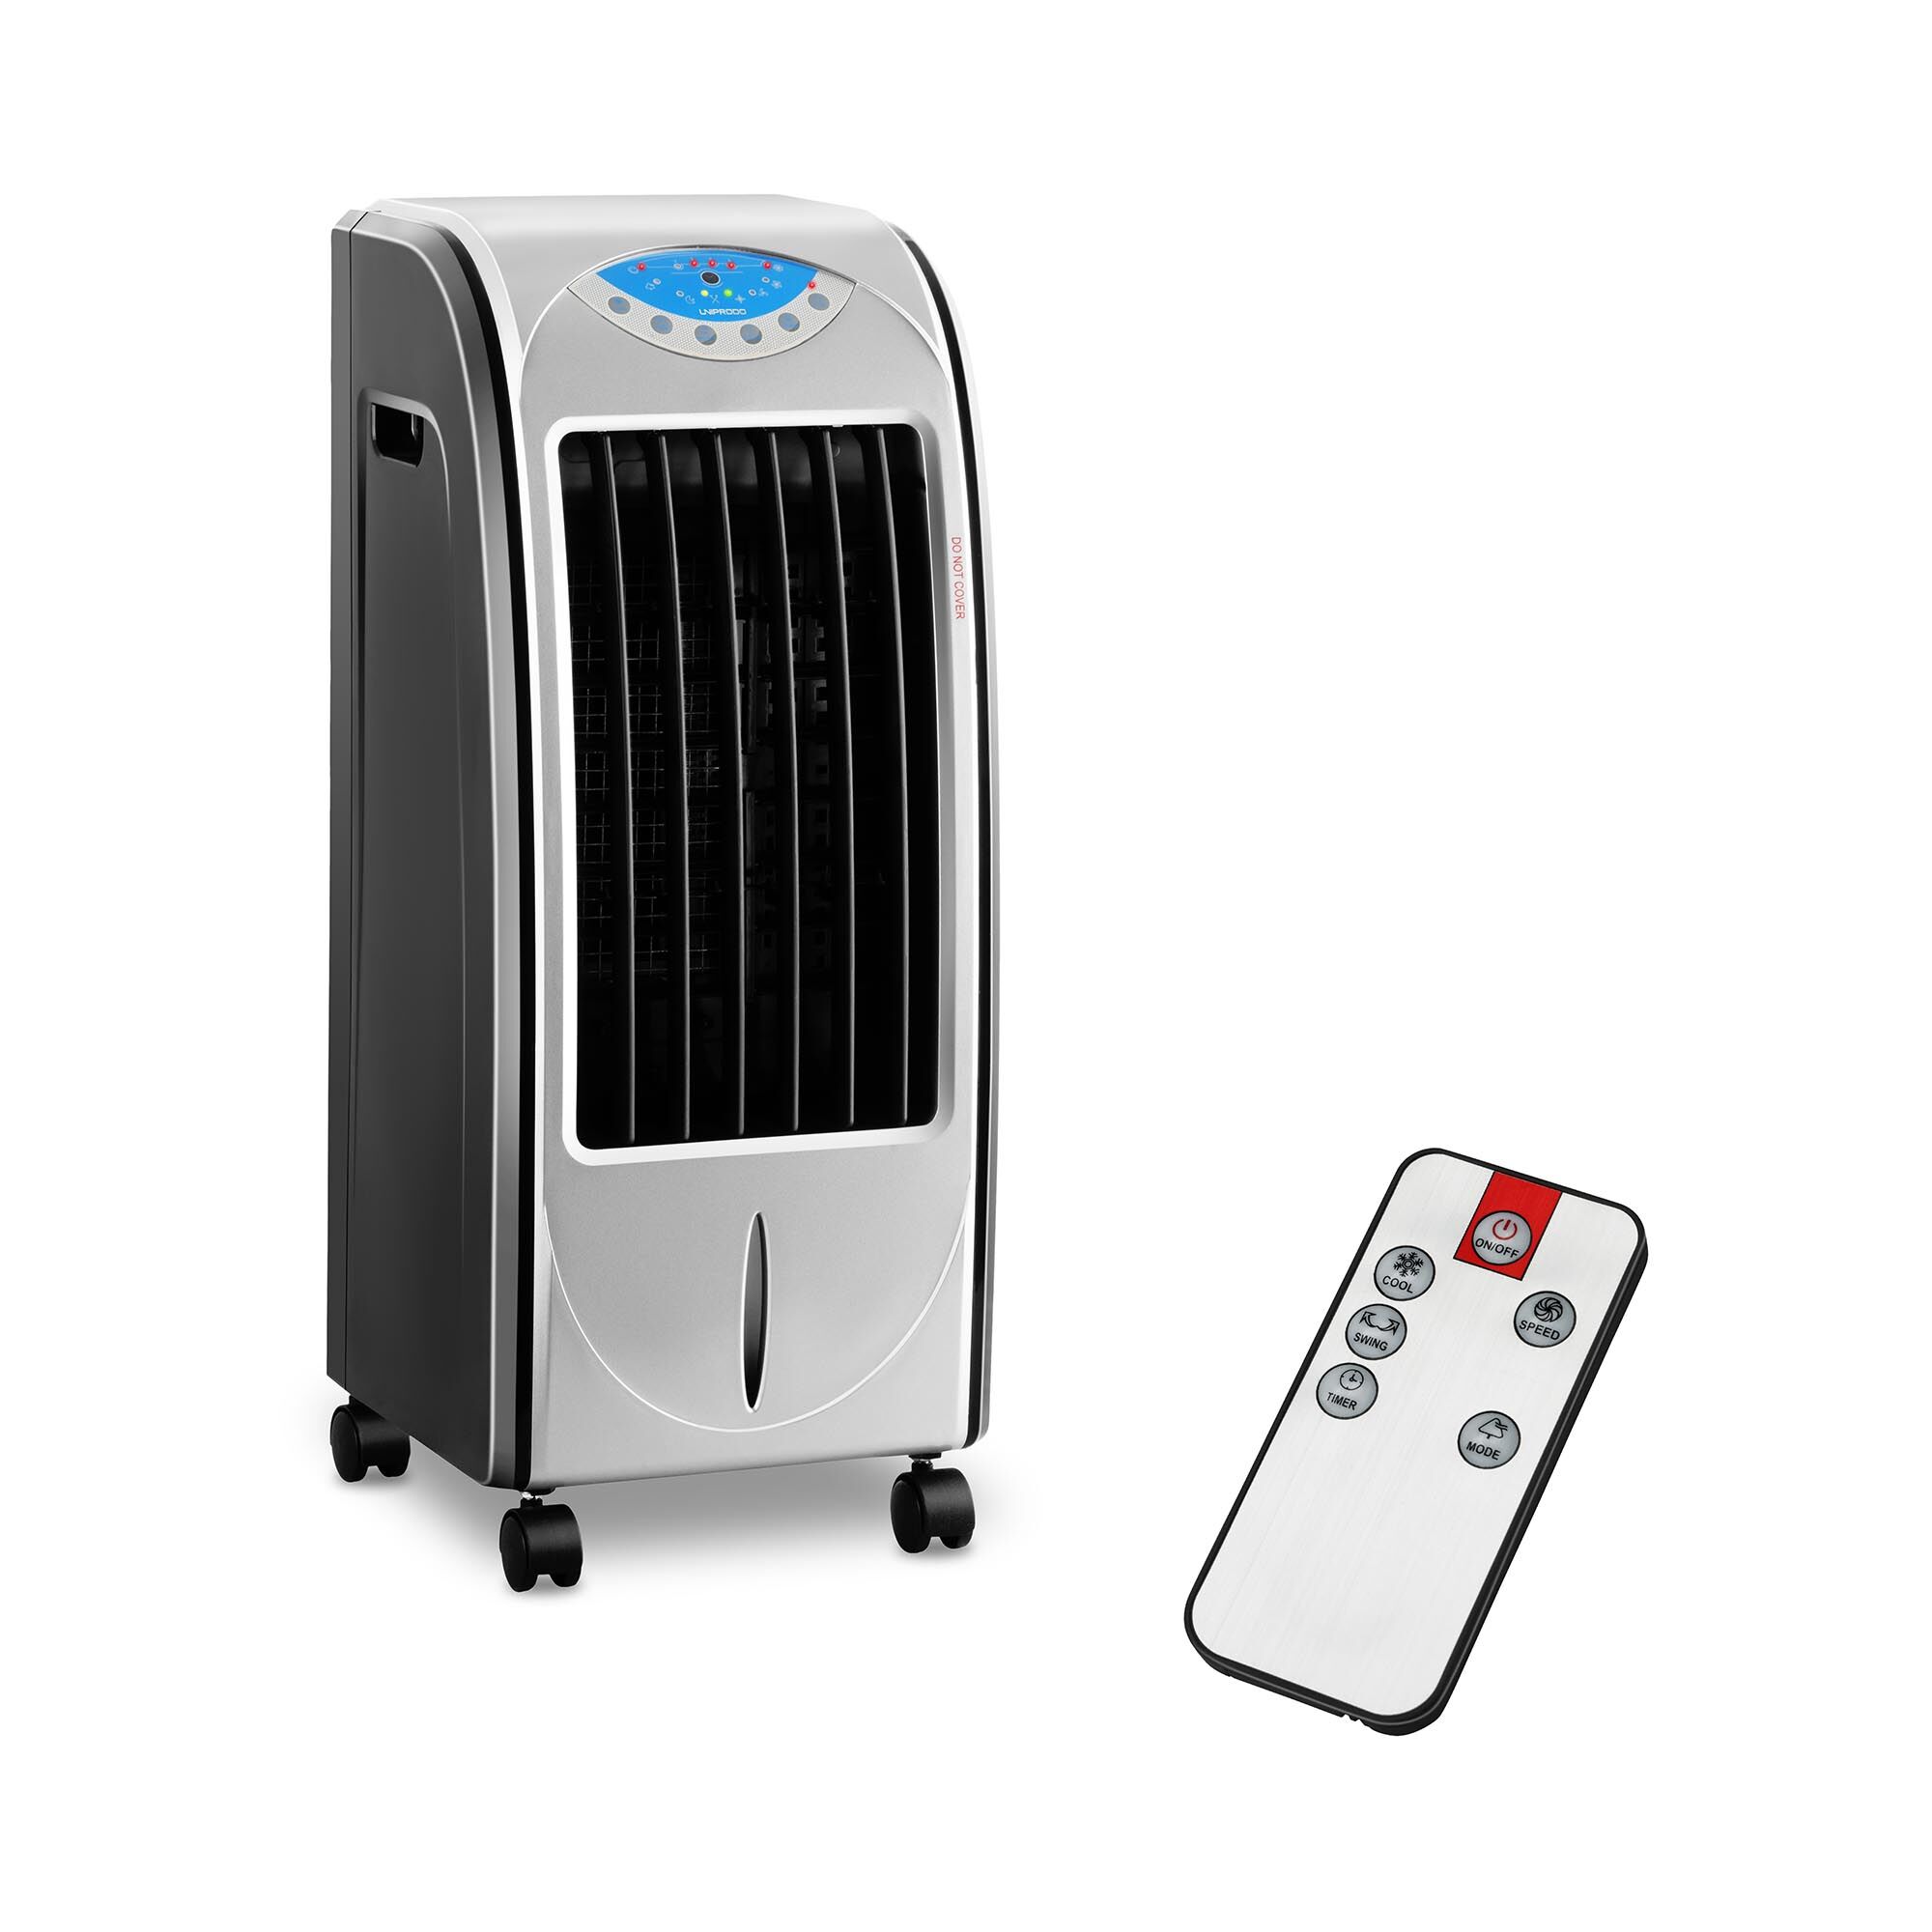 Uniprodo Water Air Cooler with Heat Function - 4-in-1 - 6 L water tank UNI_COOLER_01